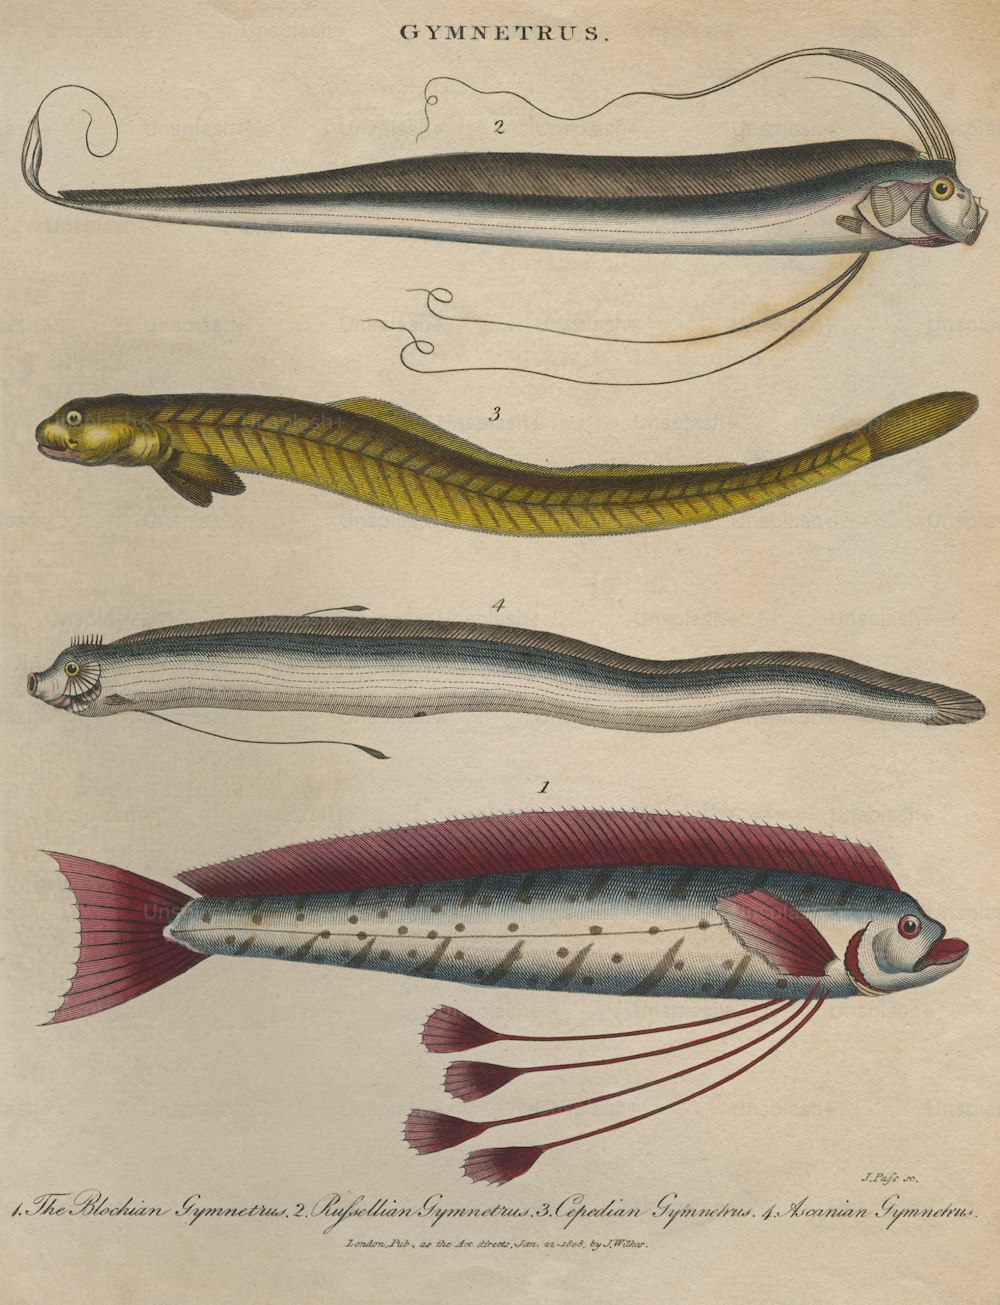 Four ribbonfish or Gymnetrus, circa 1808. From top to bottom, a Russellian gymnetrus, a Cepedian gymnetrus, an Ascanian gymnetrus and a Blochian gymnetrus.  Engraving by J. Pass. (Photo by Hulton Archive/Getty Images)